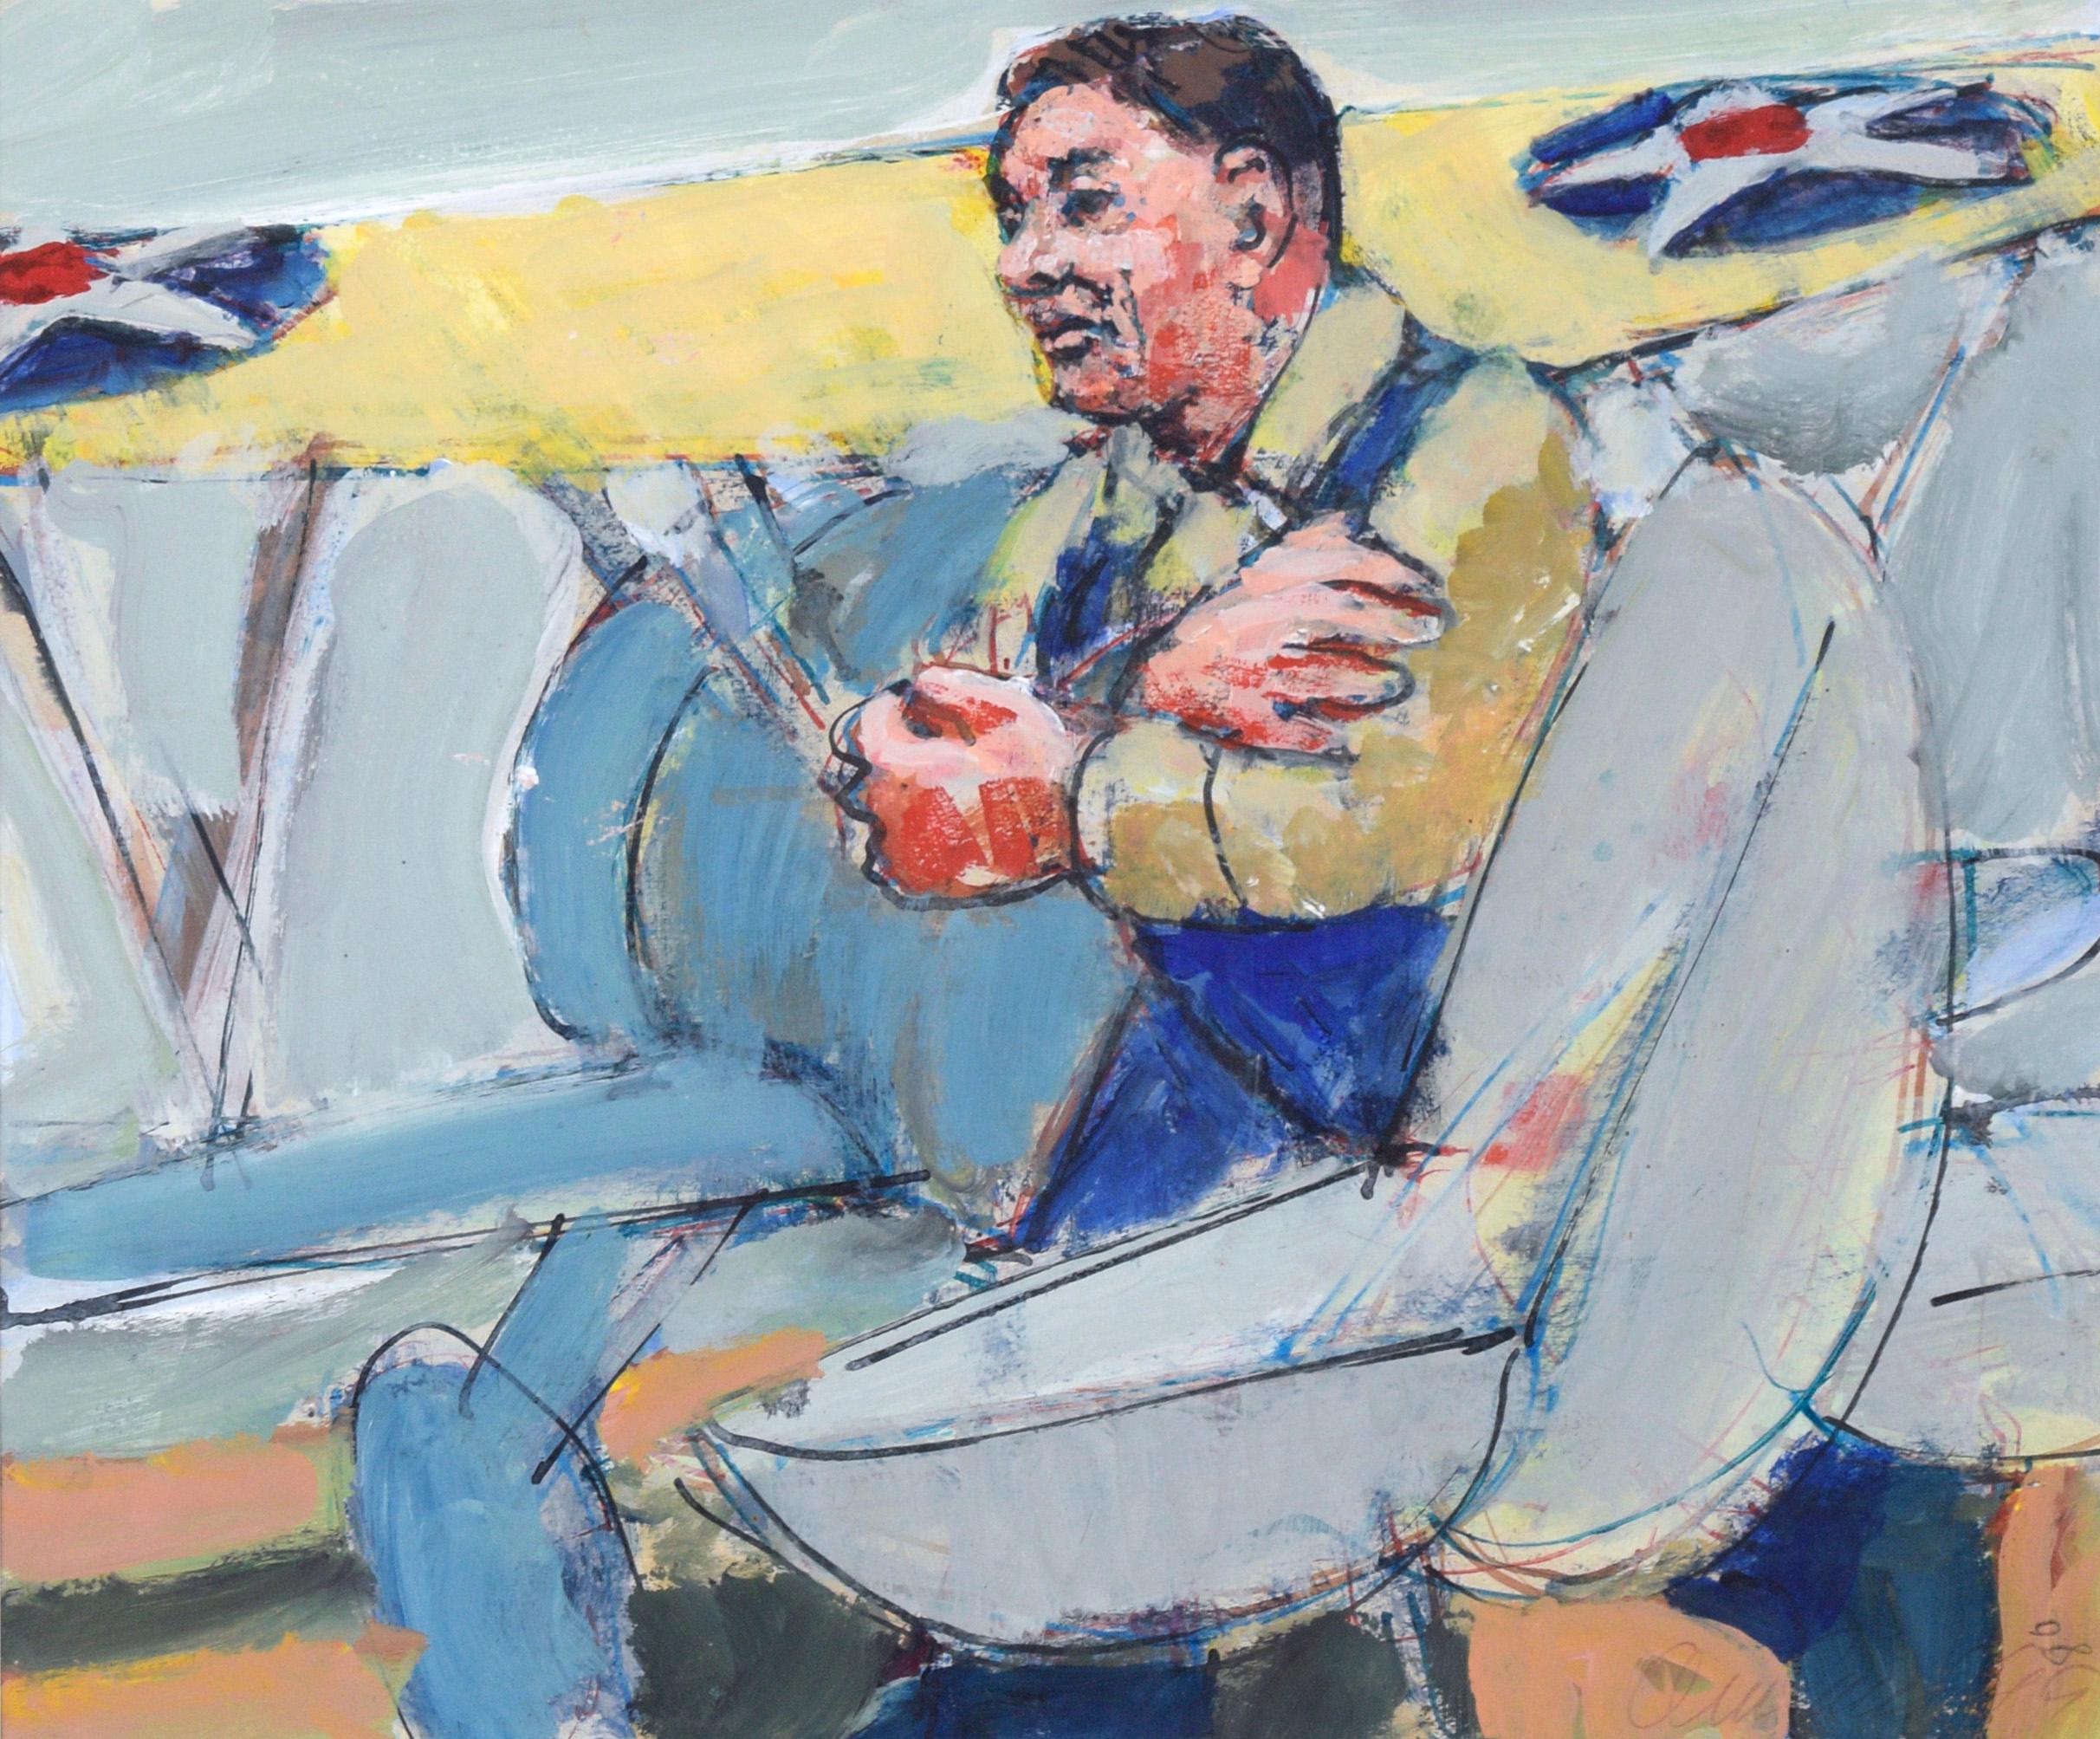 Pilots and WWII Airplanes - Double-sided Figurative Composition in Oil on Paper - Painting by David Amland